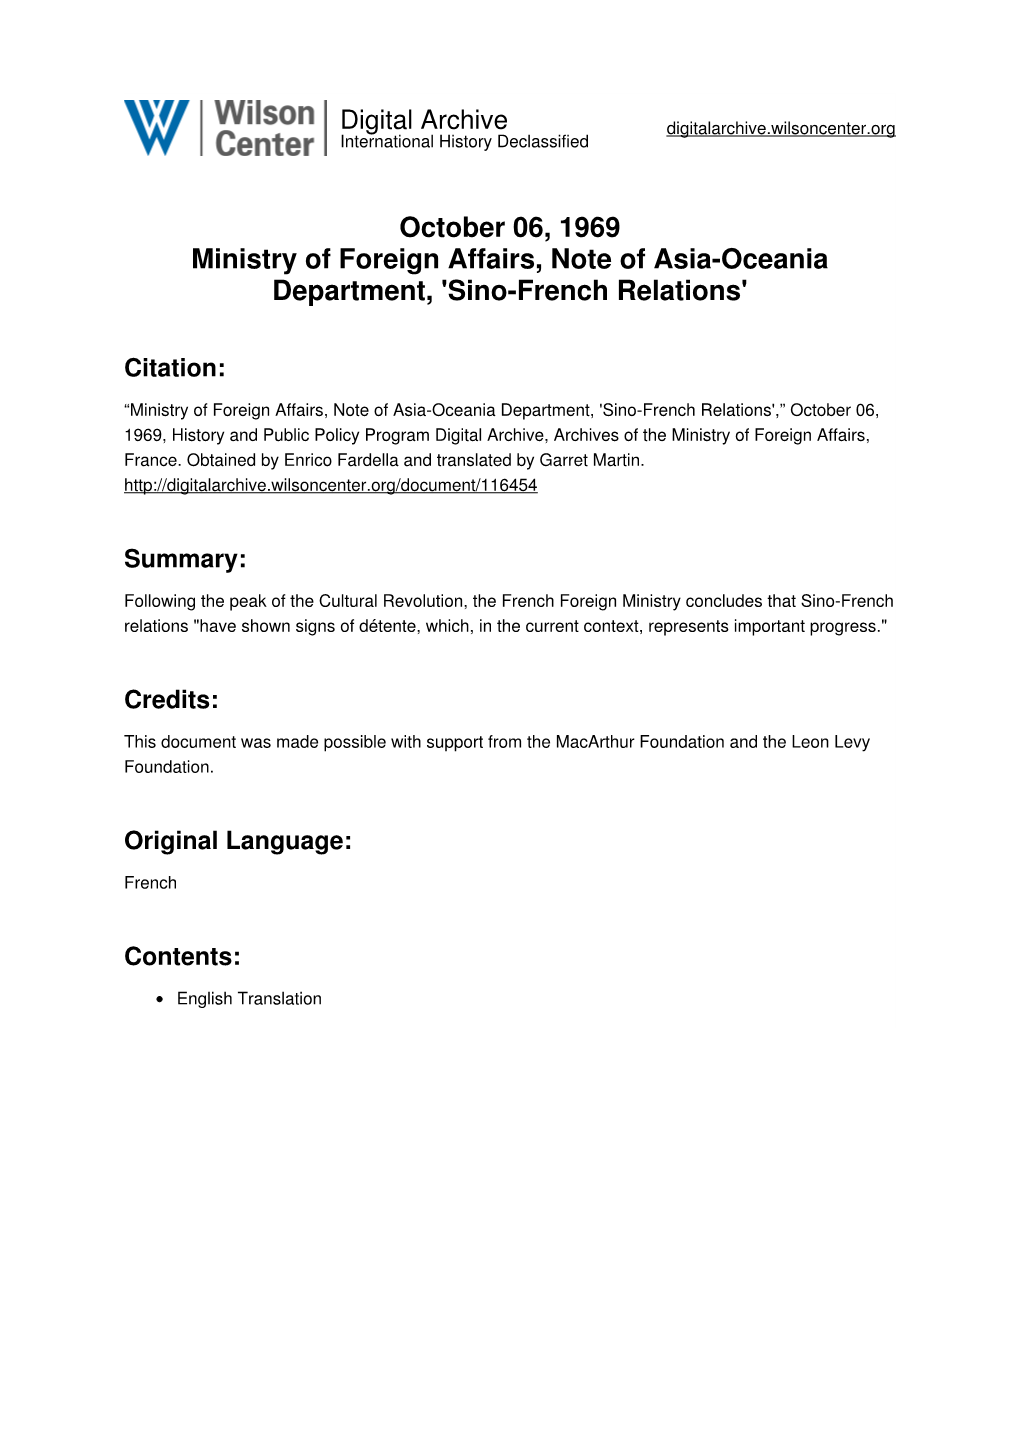 October 06, 1969 Ministry of Foreign Affairs, Note of Asia-Oceania Department, 'Sino-French Relations'